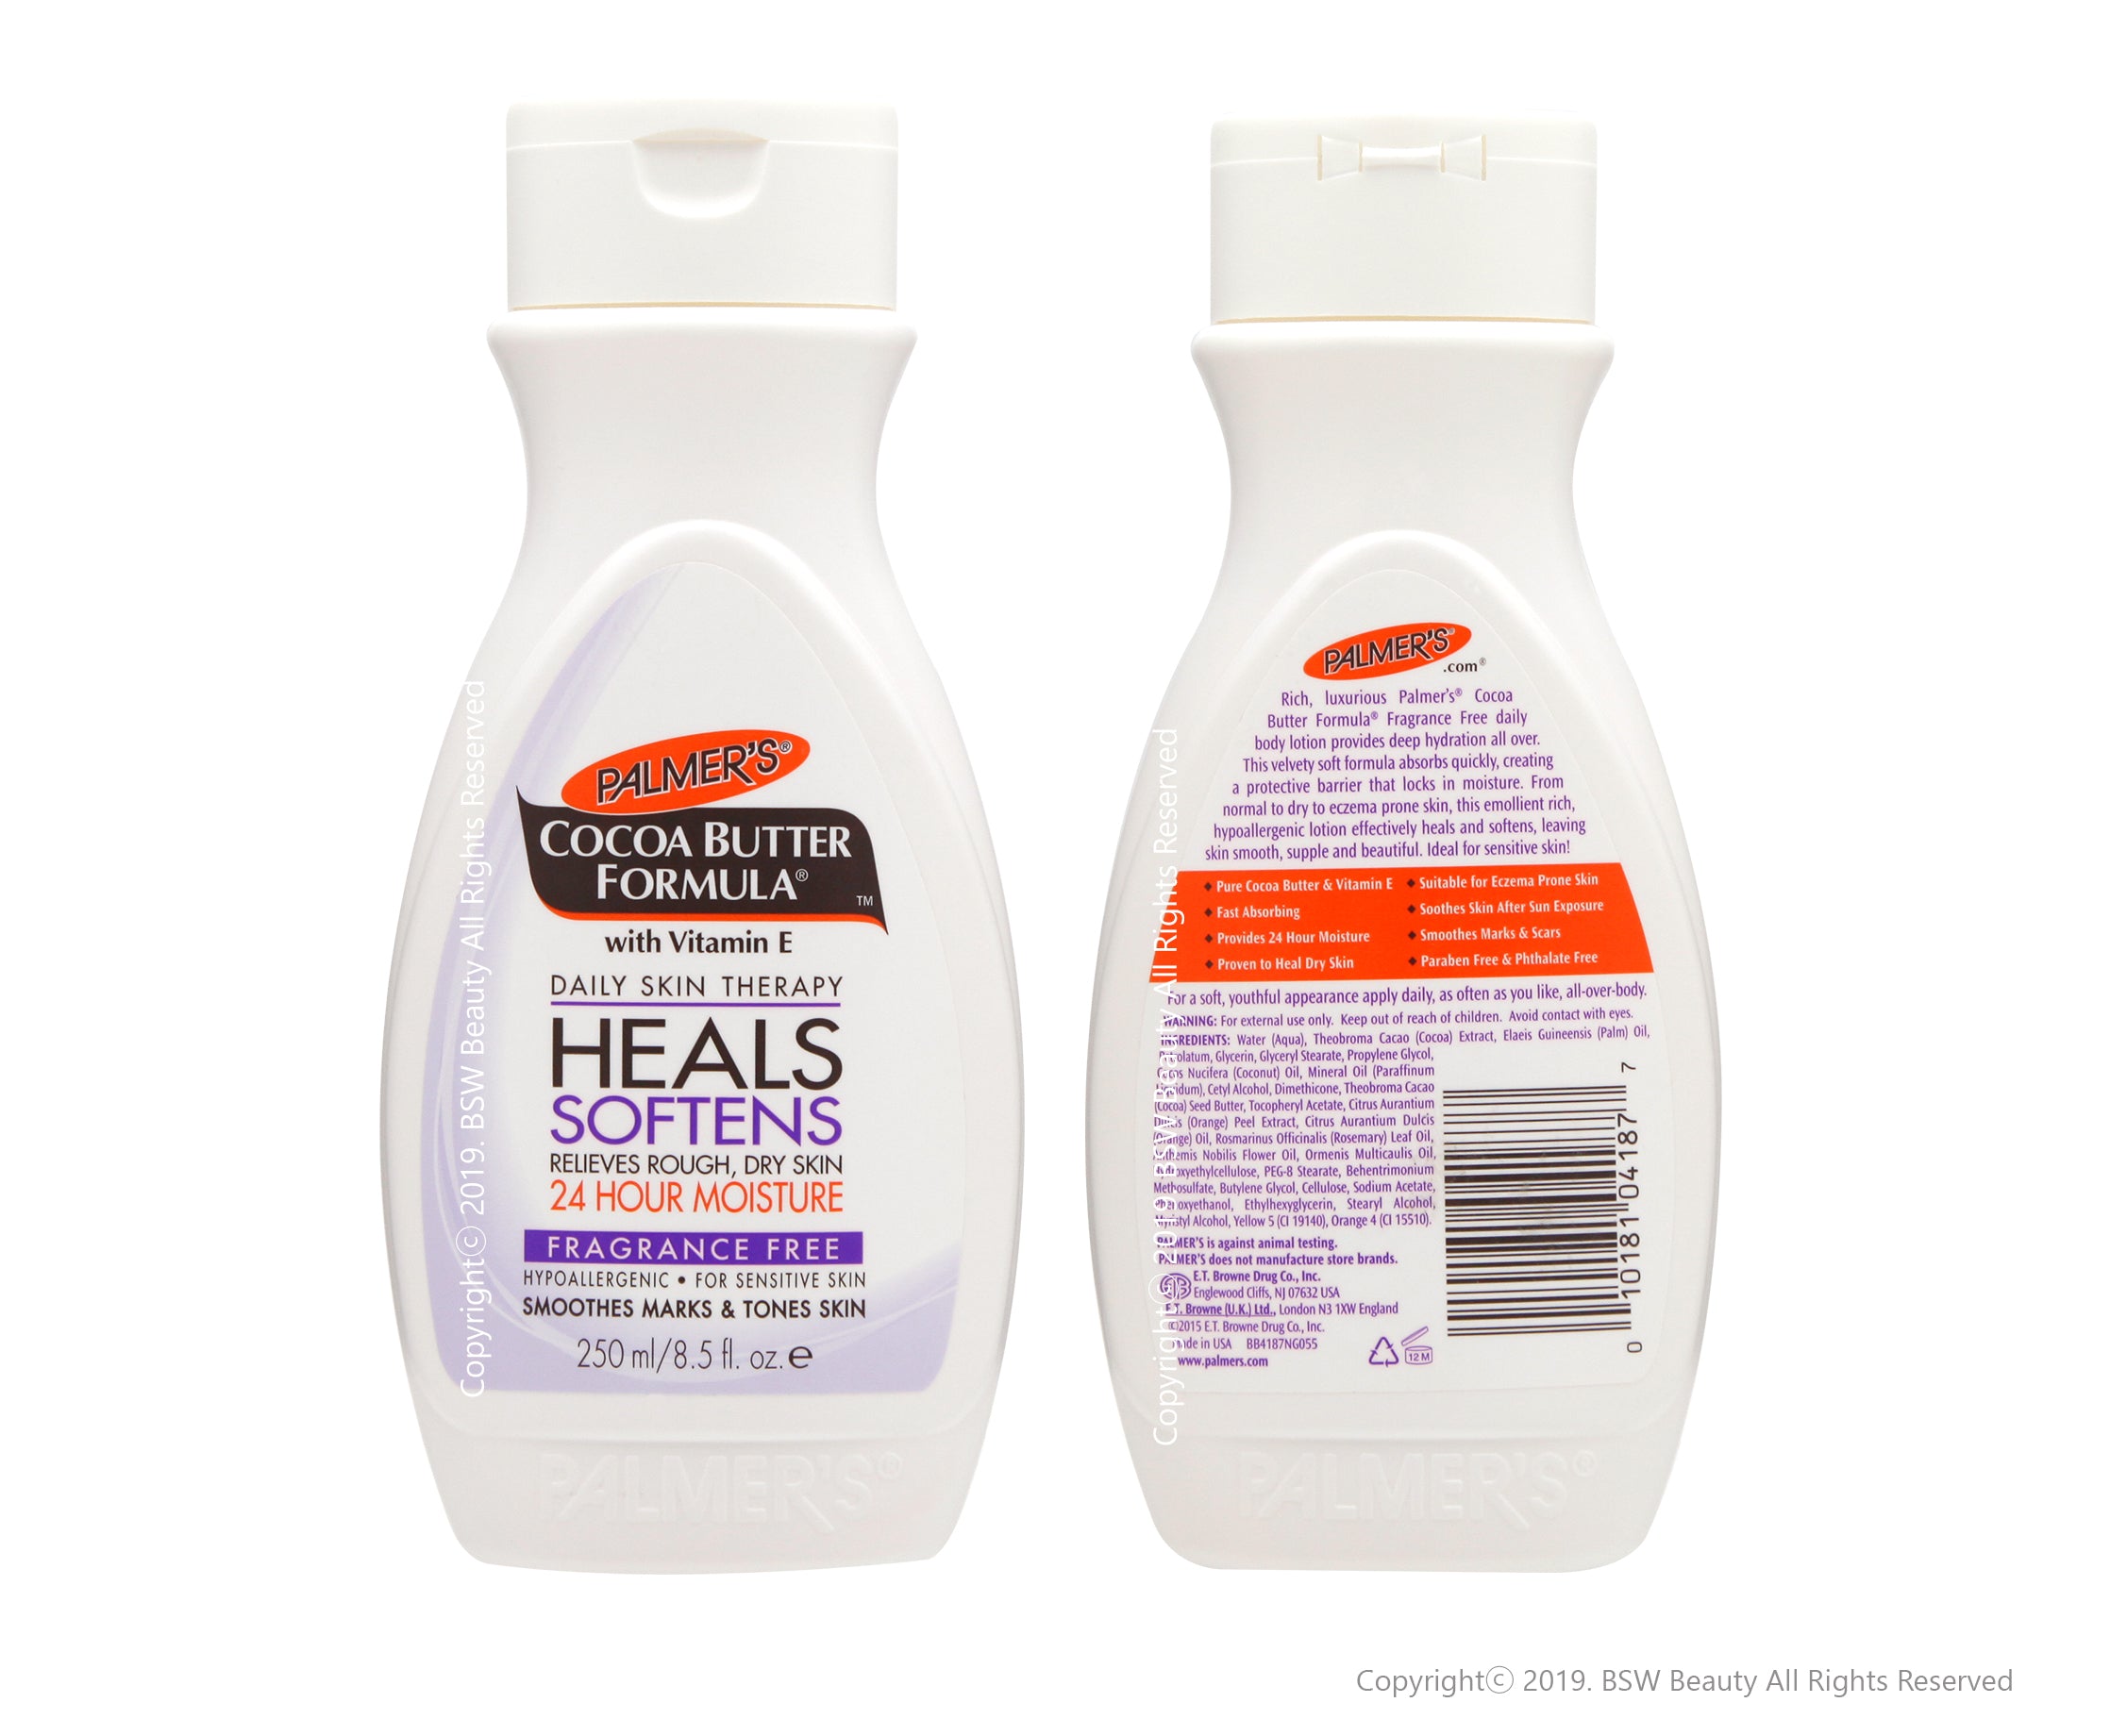 PALMER'S COCOA BUTTER FORMULA DAILY SKIN THERAPY HEALS SOFTENS LOTION